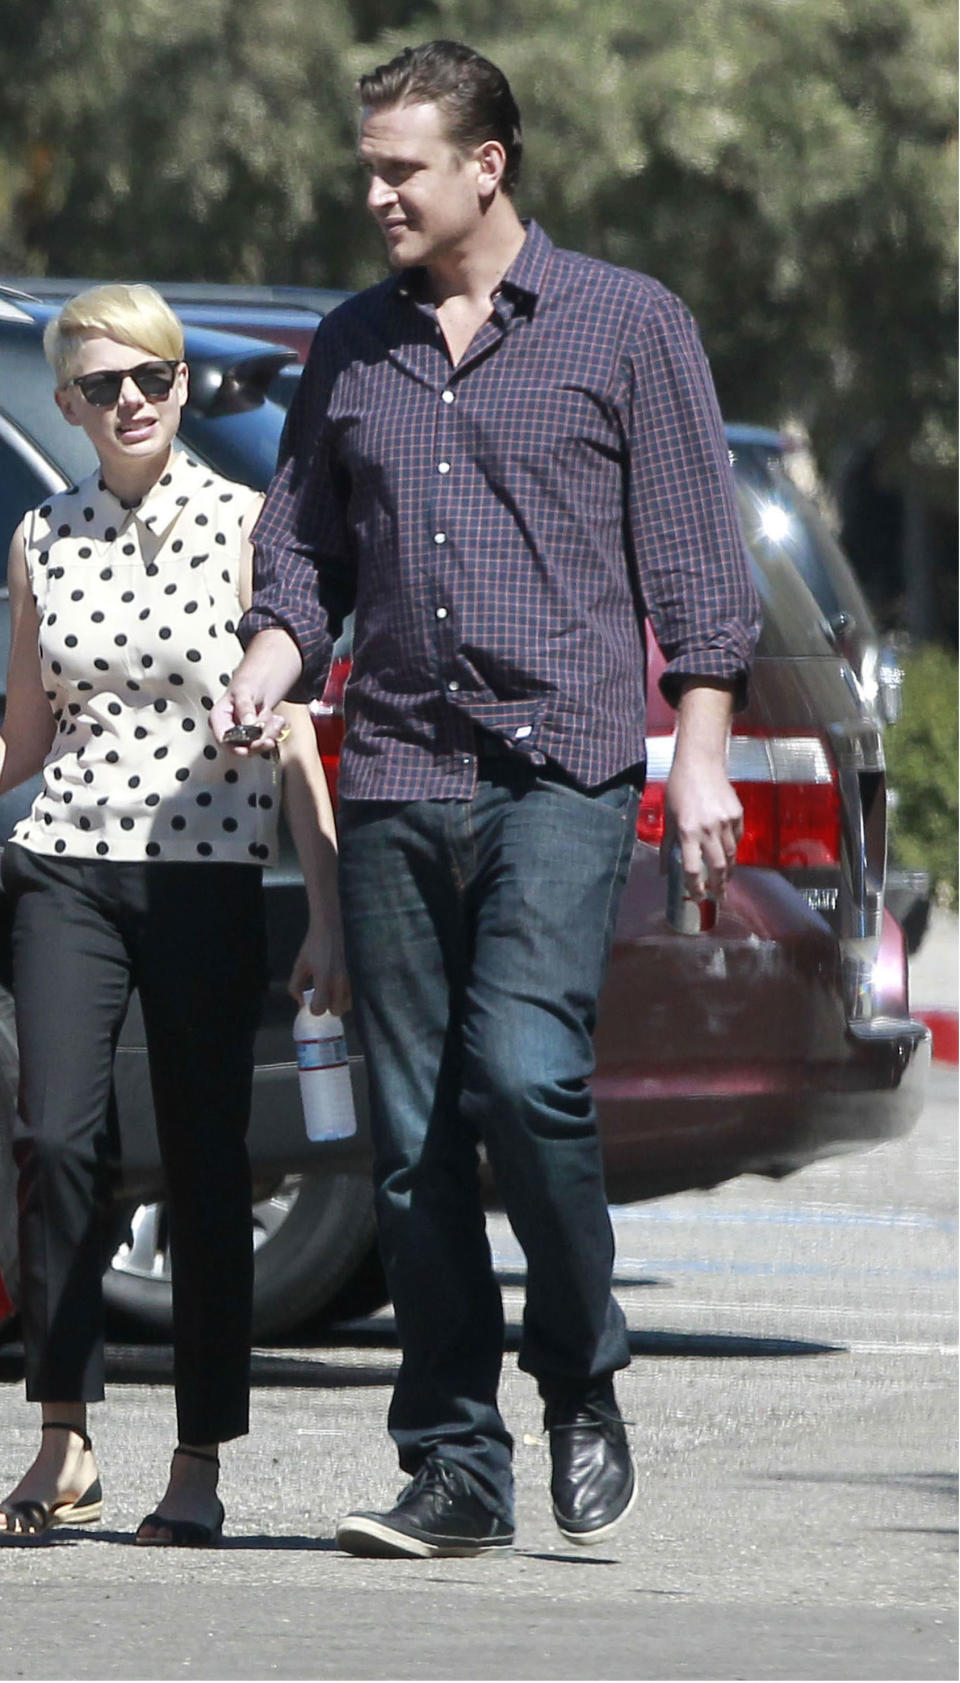 Michelle Williams and Jason Segel <a href="http://www.huffingtonpost.com/2013/03/01/michelle-williams-jason-segel-split-breakup_n_2789211.html" target="_blank">ended their relationship in March</a> after dating for nearly a year. 